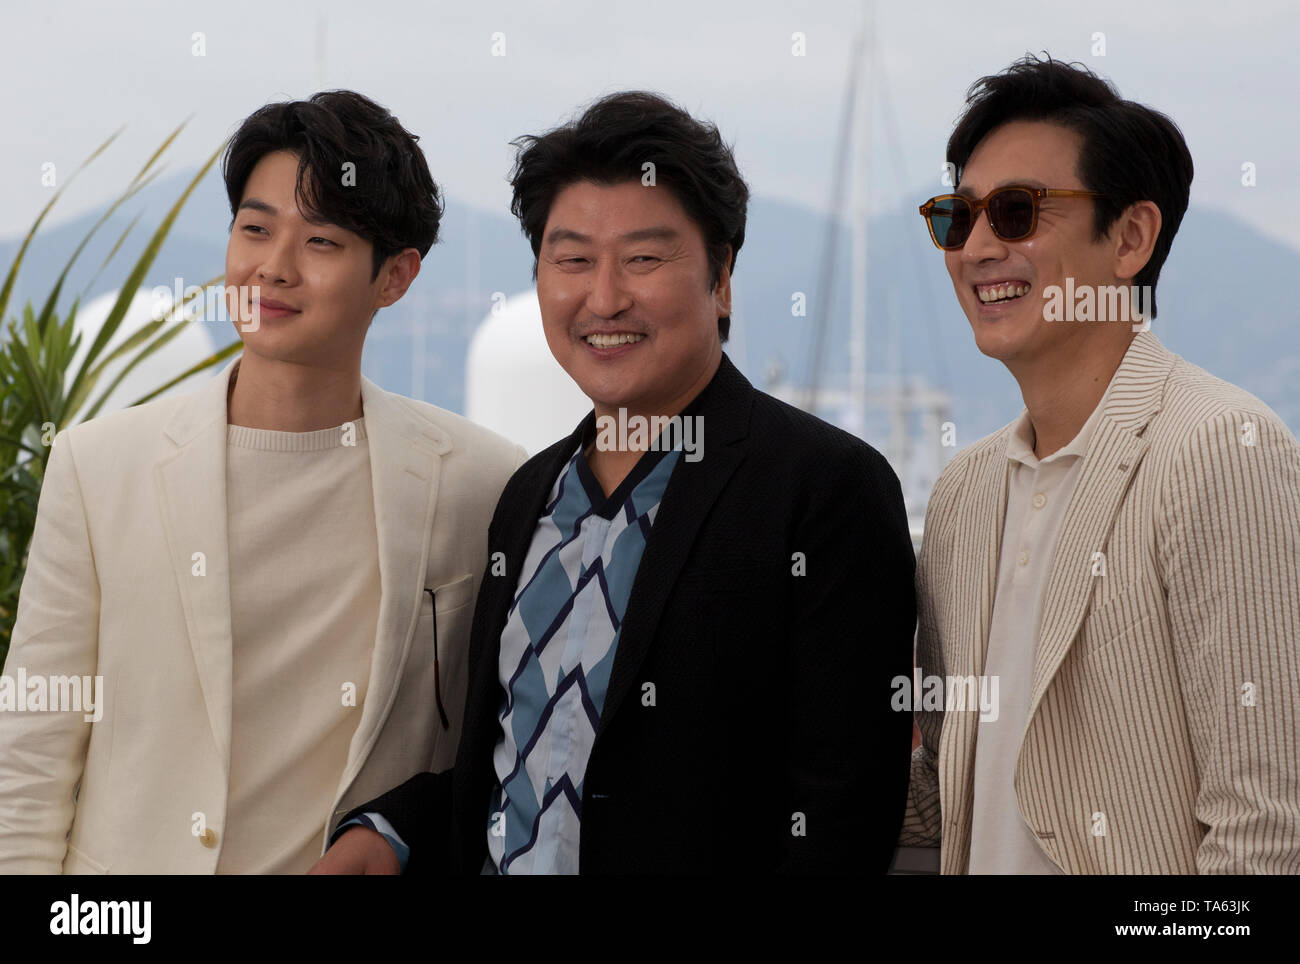 Cannes, France. 22nd May, 2019. Song Kang-ho, Choi Woo-shik and Lee Sun-gyun at the Parasite film photo call at the 72nd Cannes Film Festival, Wednesday 22nd May 2019, Cannes, France. Photo Credit: Doreen Kennedy/Alamy Live News Stock Photo